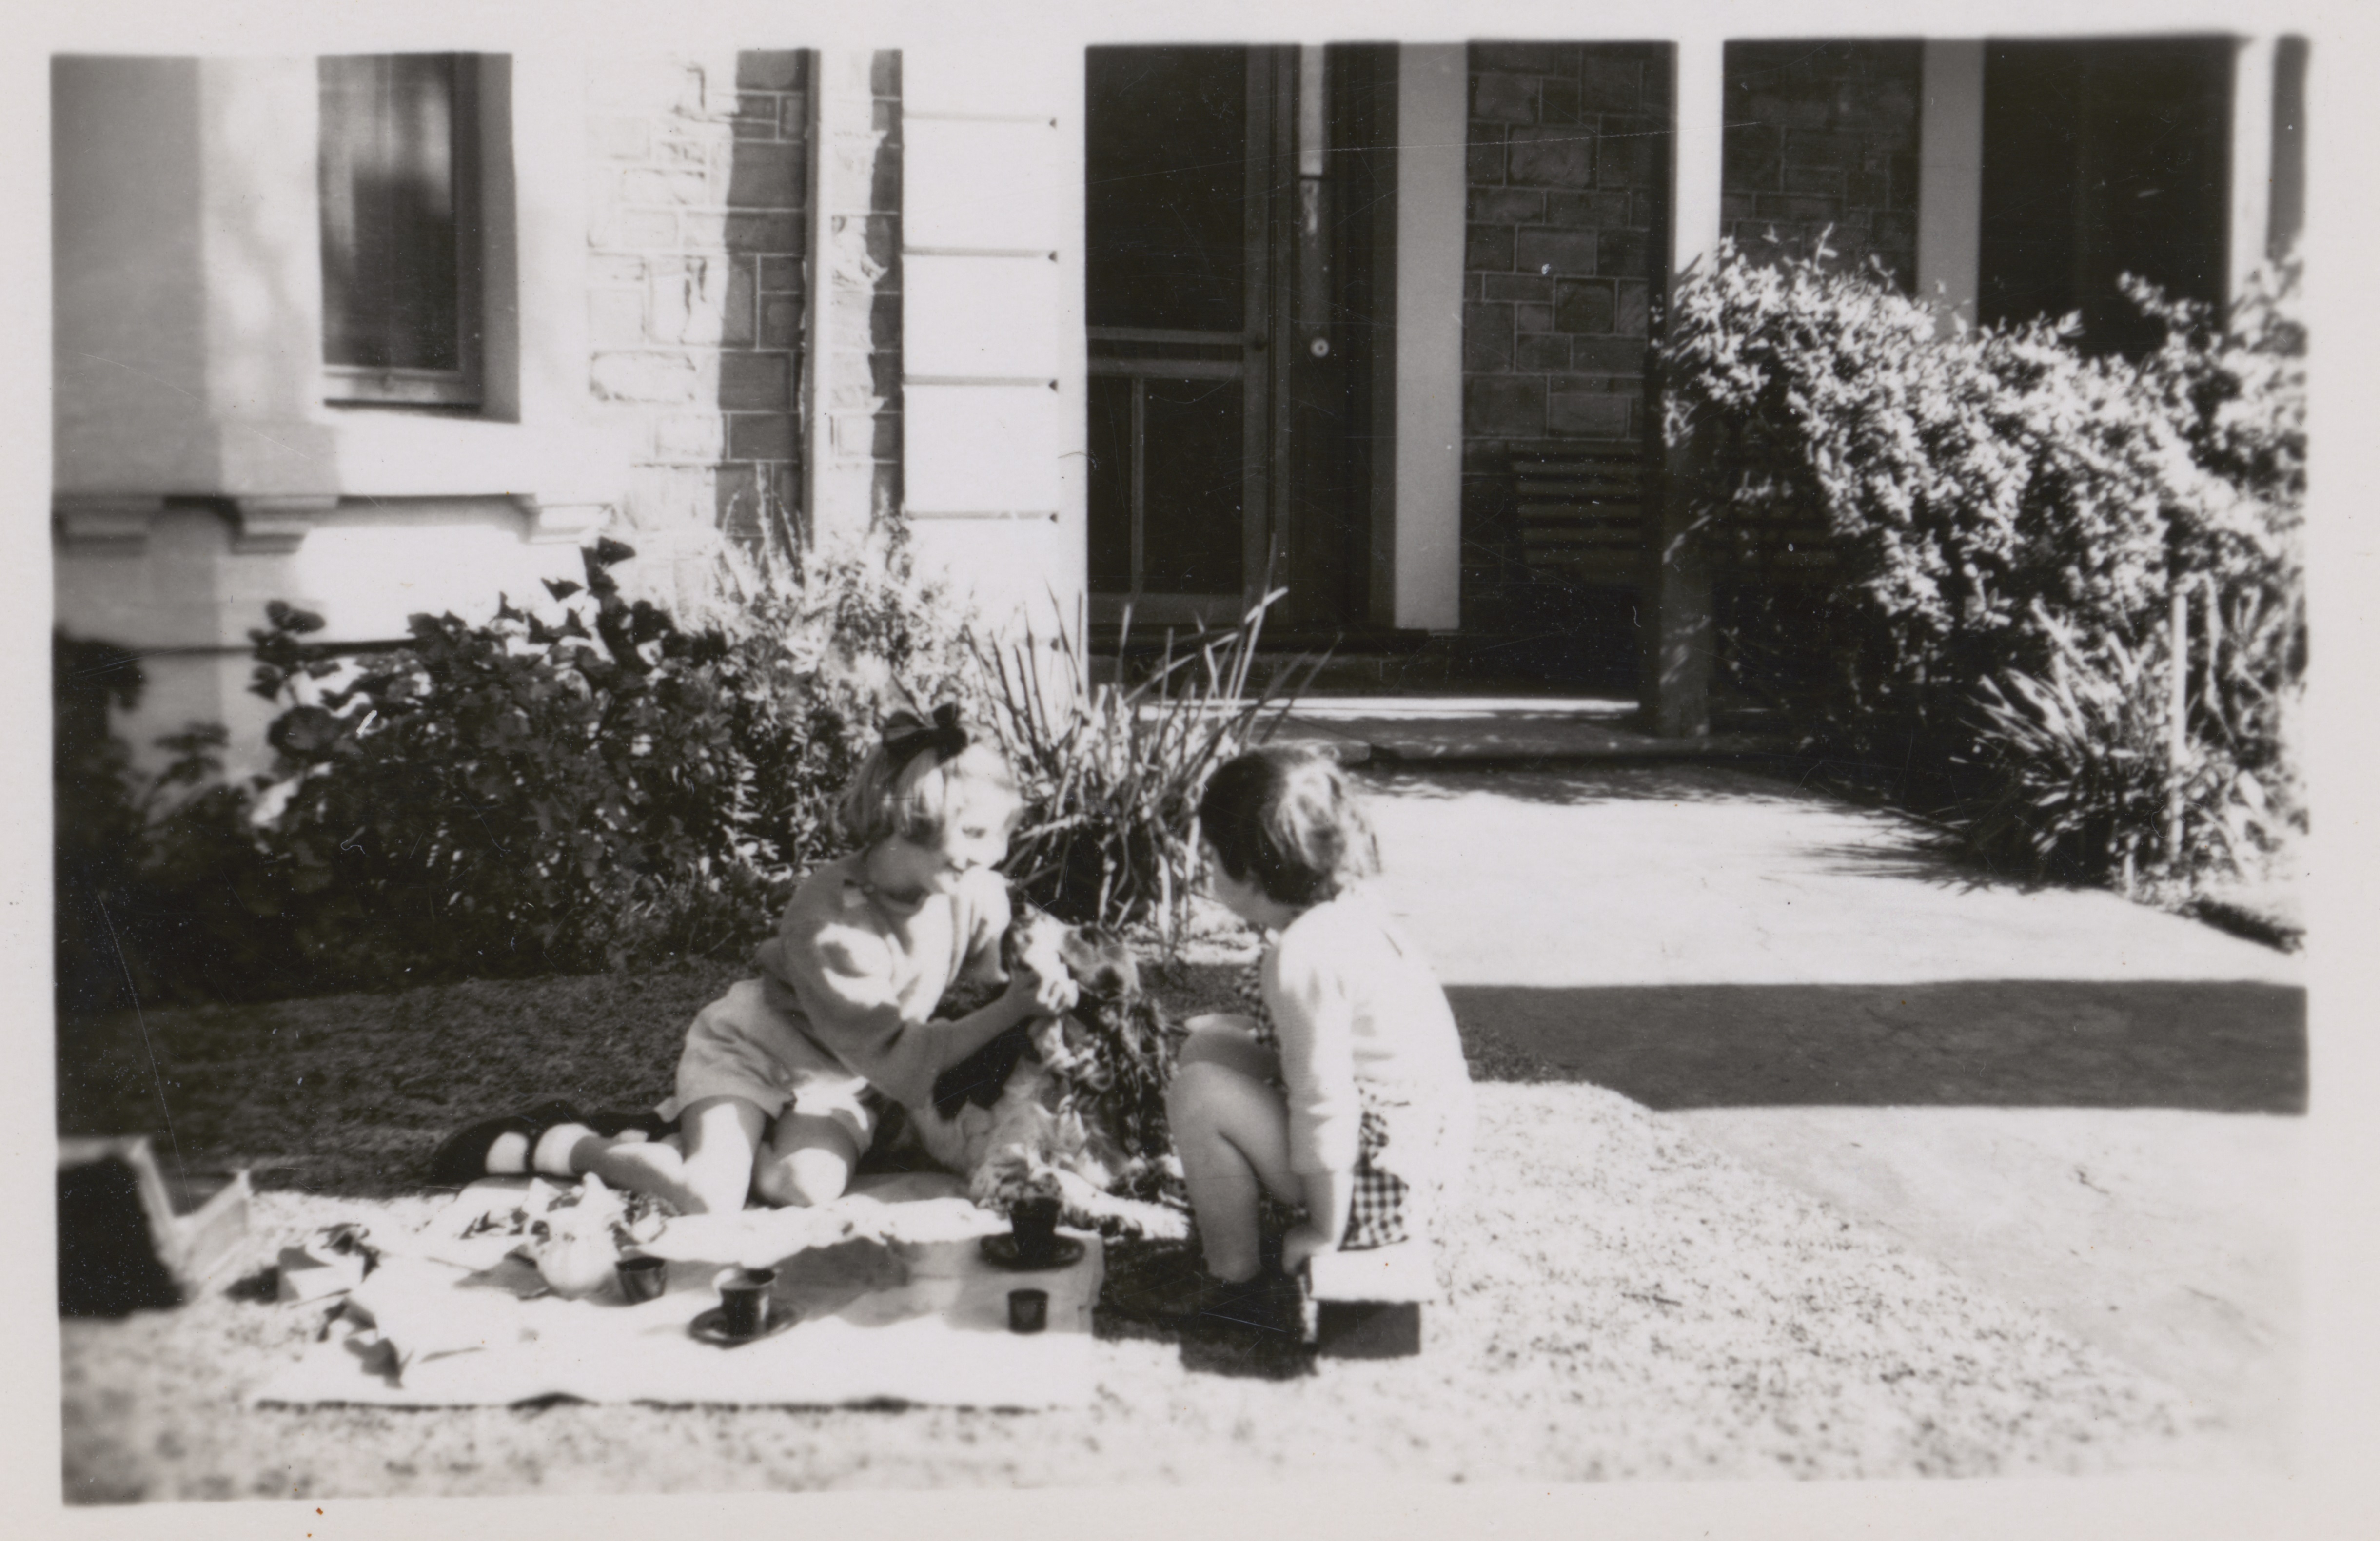 Children Rosemary and Gabrielle take tea on the lawn with their dog, in Largs Bay, 28th August 1948.